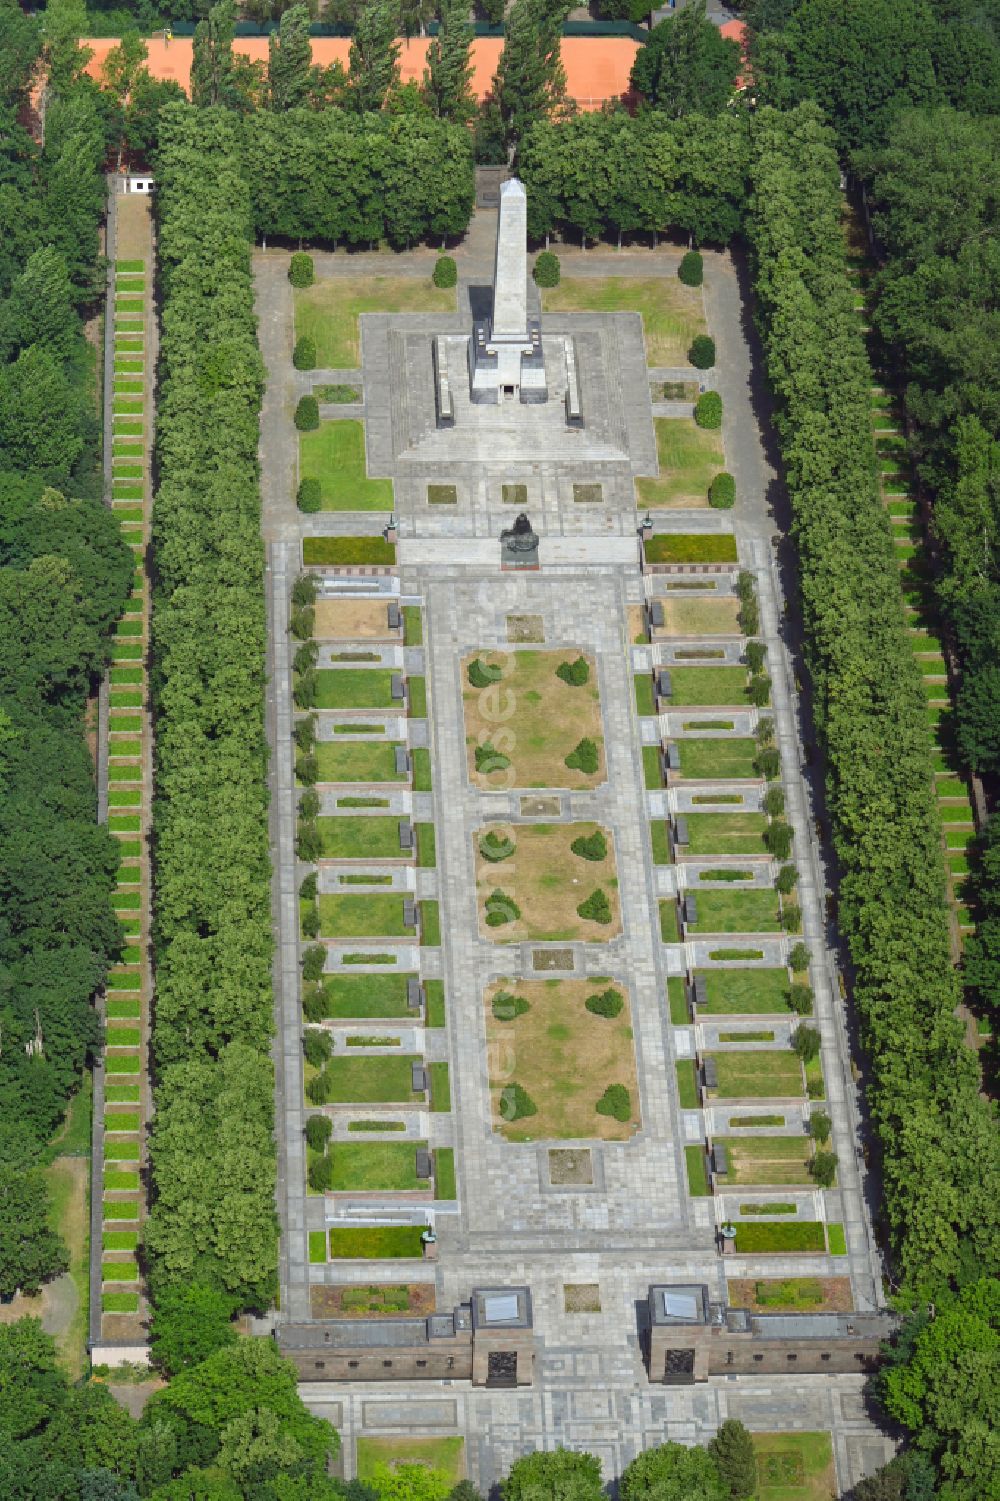 Aerial image Berlin - Sight and tourism attraction of the historical monument Soviet - Russian memorial in the park of Schoenholzer Heide on Germanenstrasse in the district Wilhelmsruh in Berlin, Germany